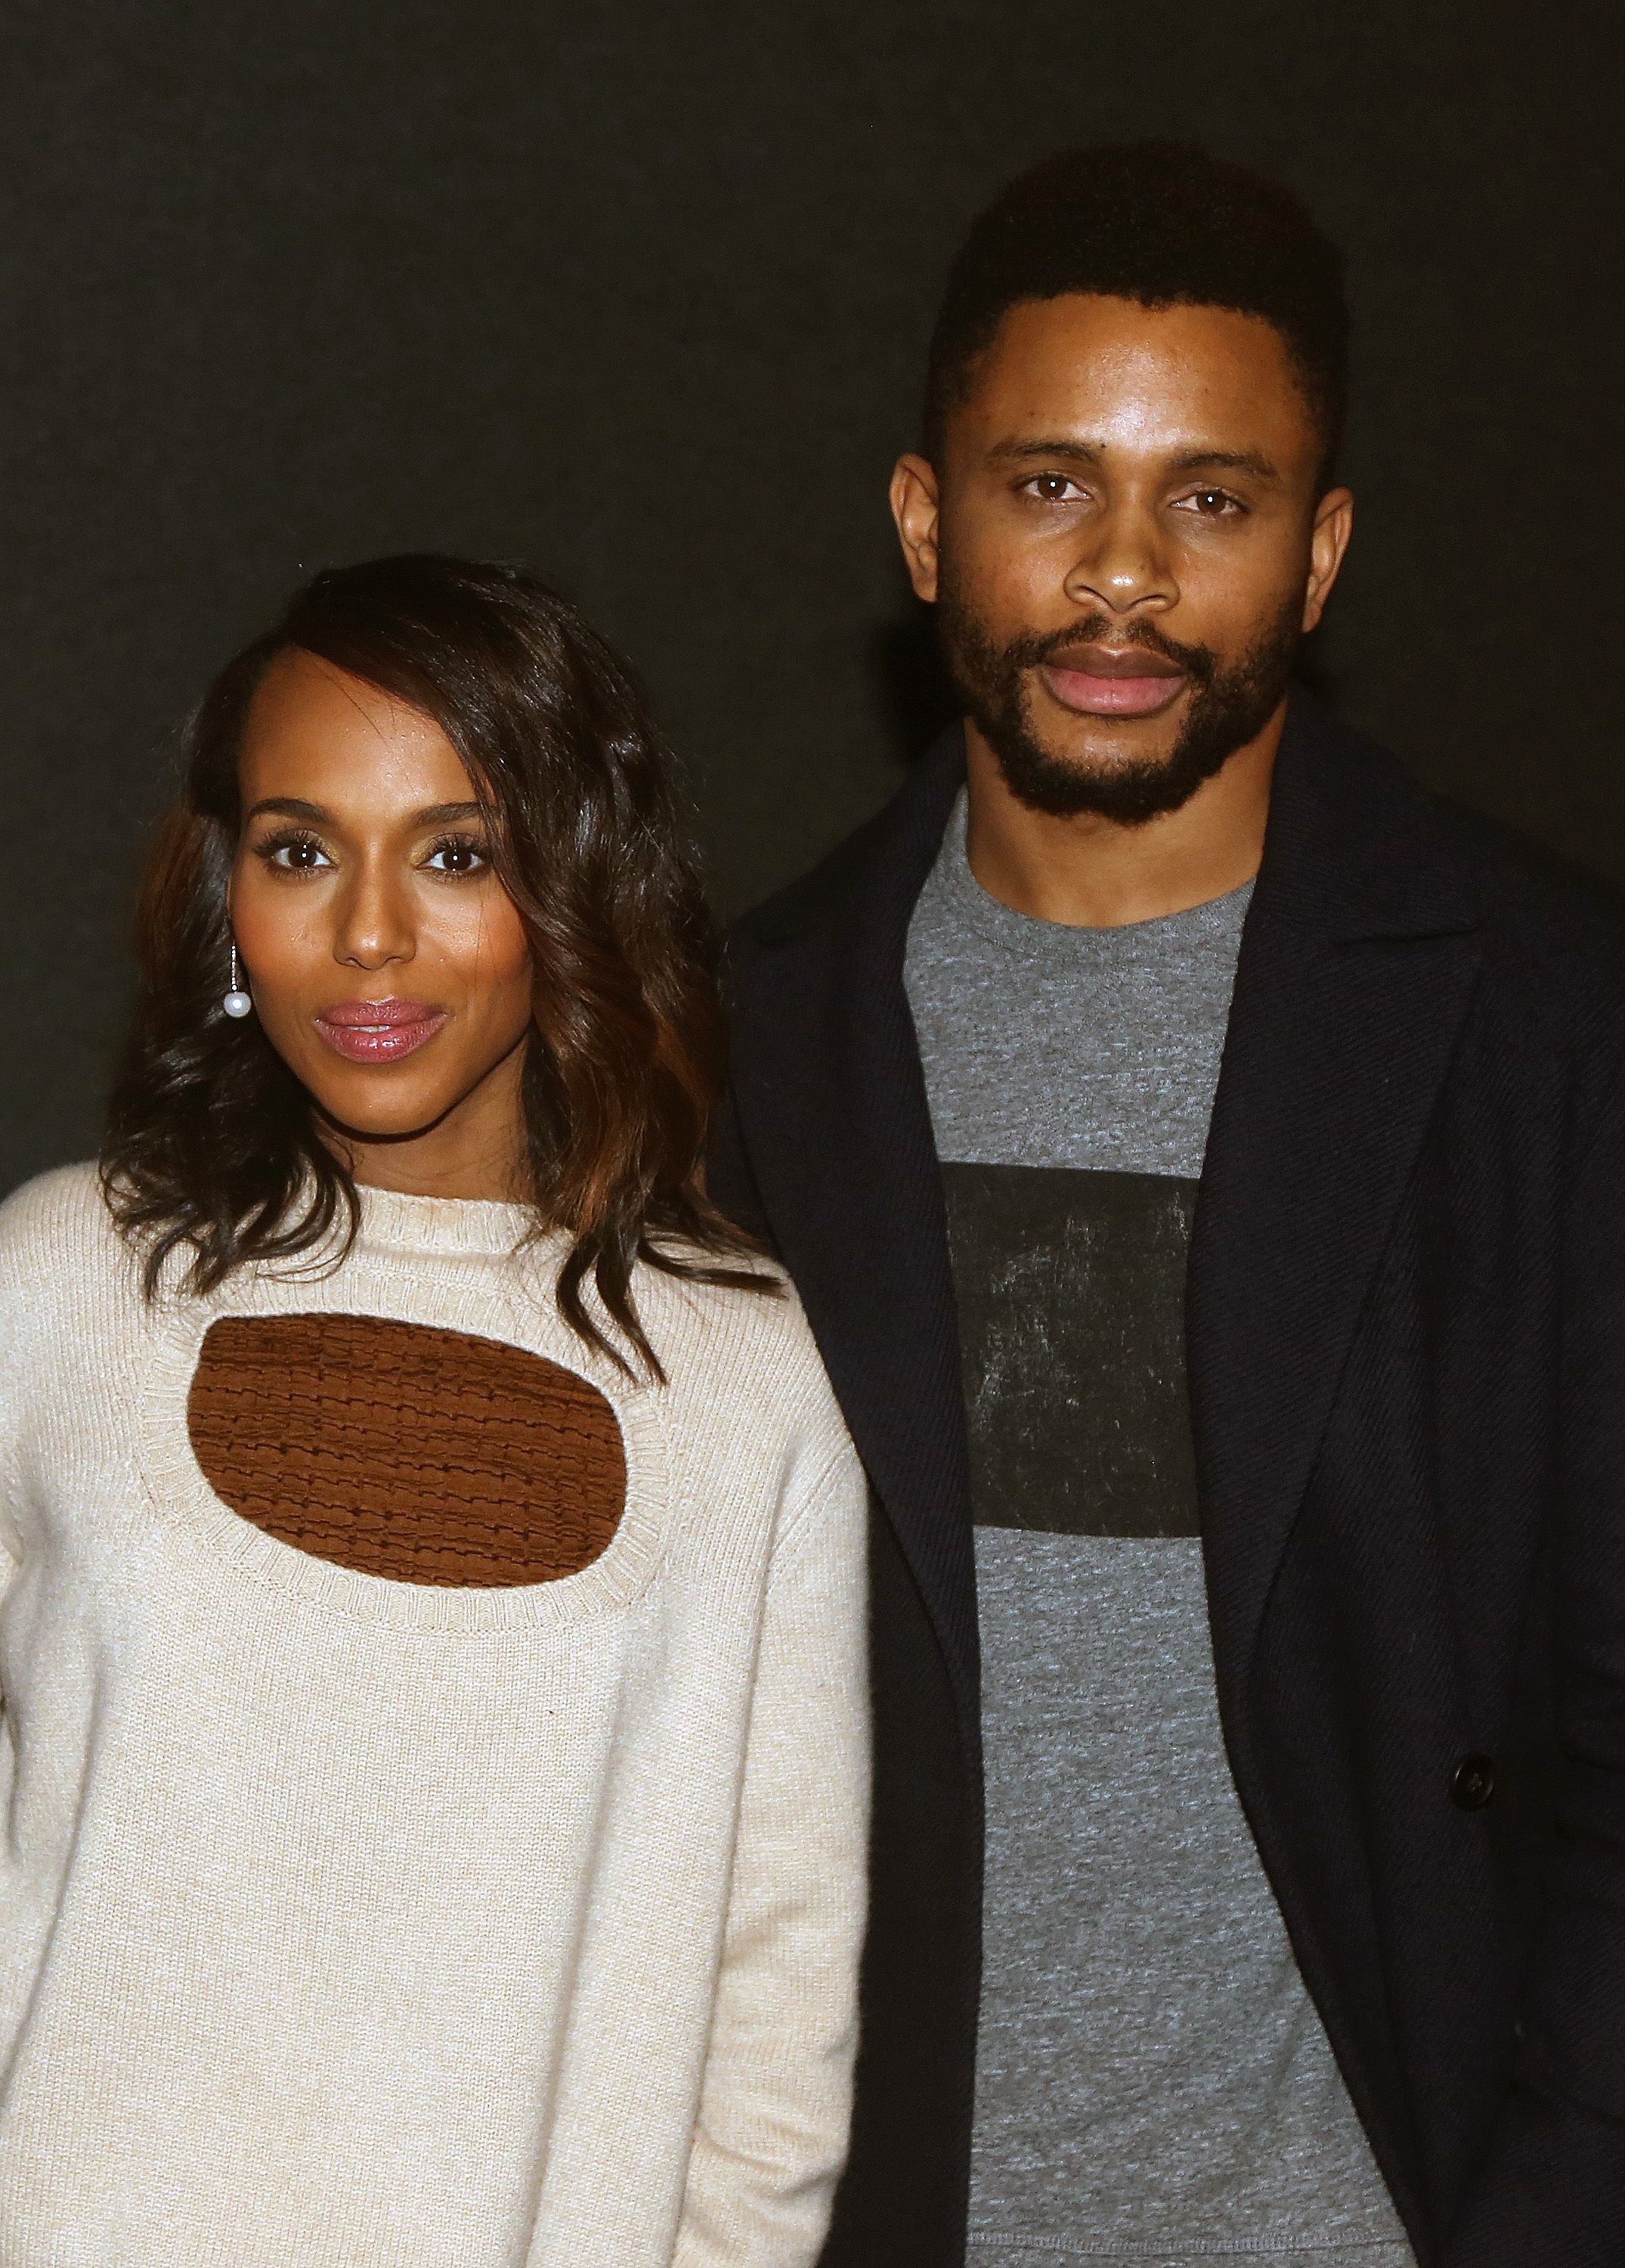 Kerry Washington and husband Nnamdi Asomugha pose at a screening for Annapurna Pictures film "If Beale Street Could Talk" hosted by Kerry Washington at Landmark 57 Theatre on November 26, 2018 in New York City. | Source: Getty Images